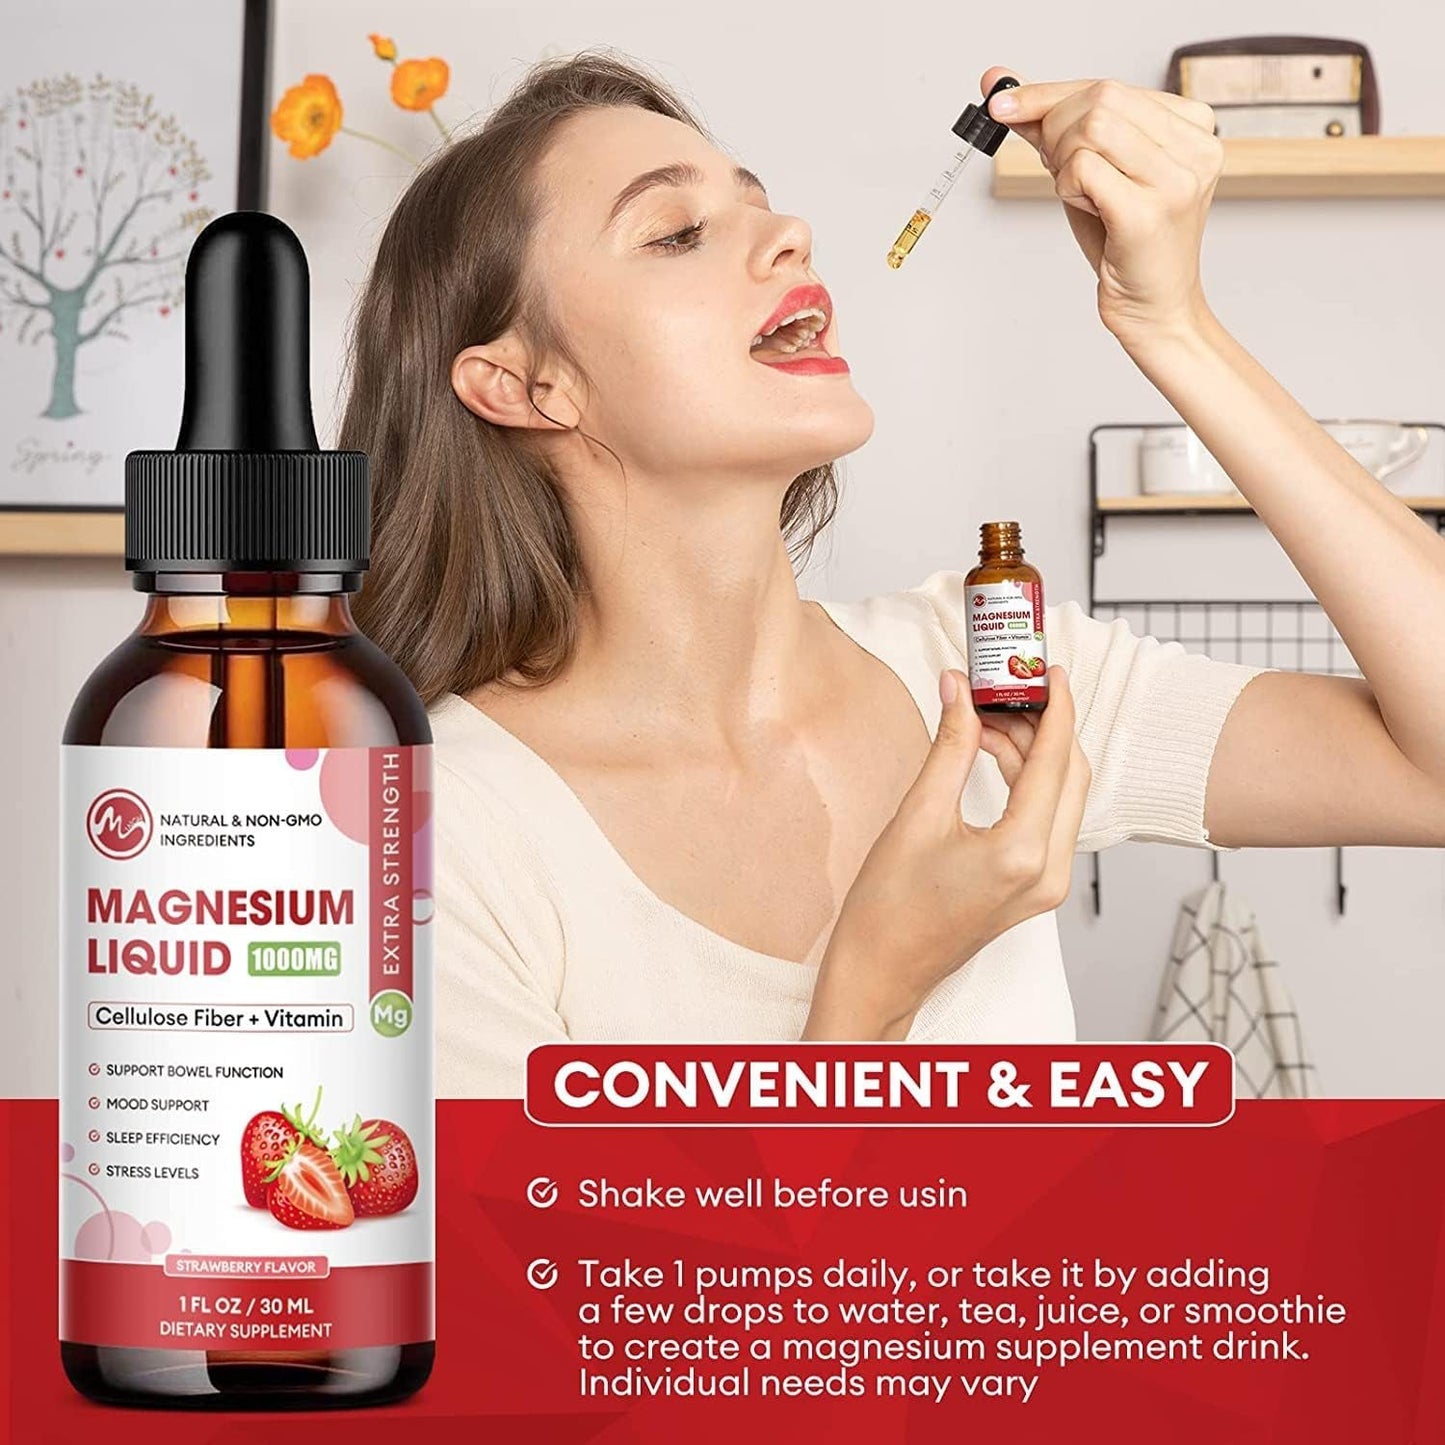 2 Packs-Strawberry Flavor-Magnesium Glycinate Supplement, Liquid Drops with Magnesium Glycinate 1000mg, Fiber 500mg, Bromelain, Vitamin B,C,D - Promotes Nerve, Bowel, Relaxation Function